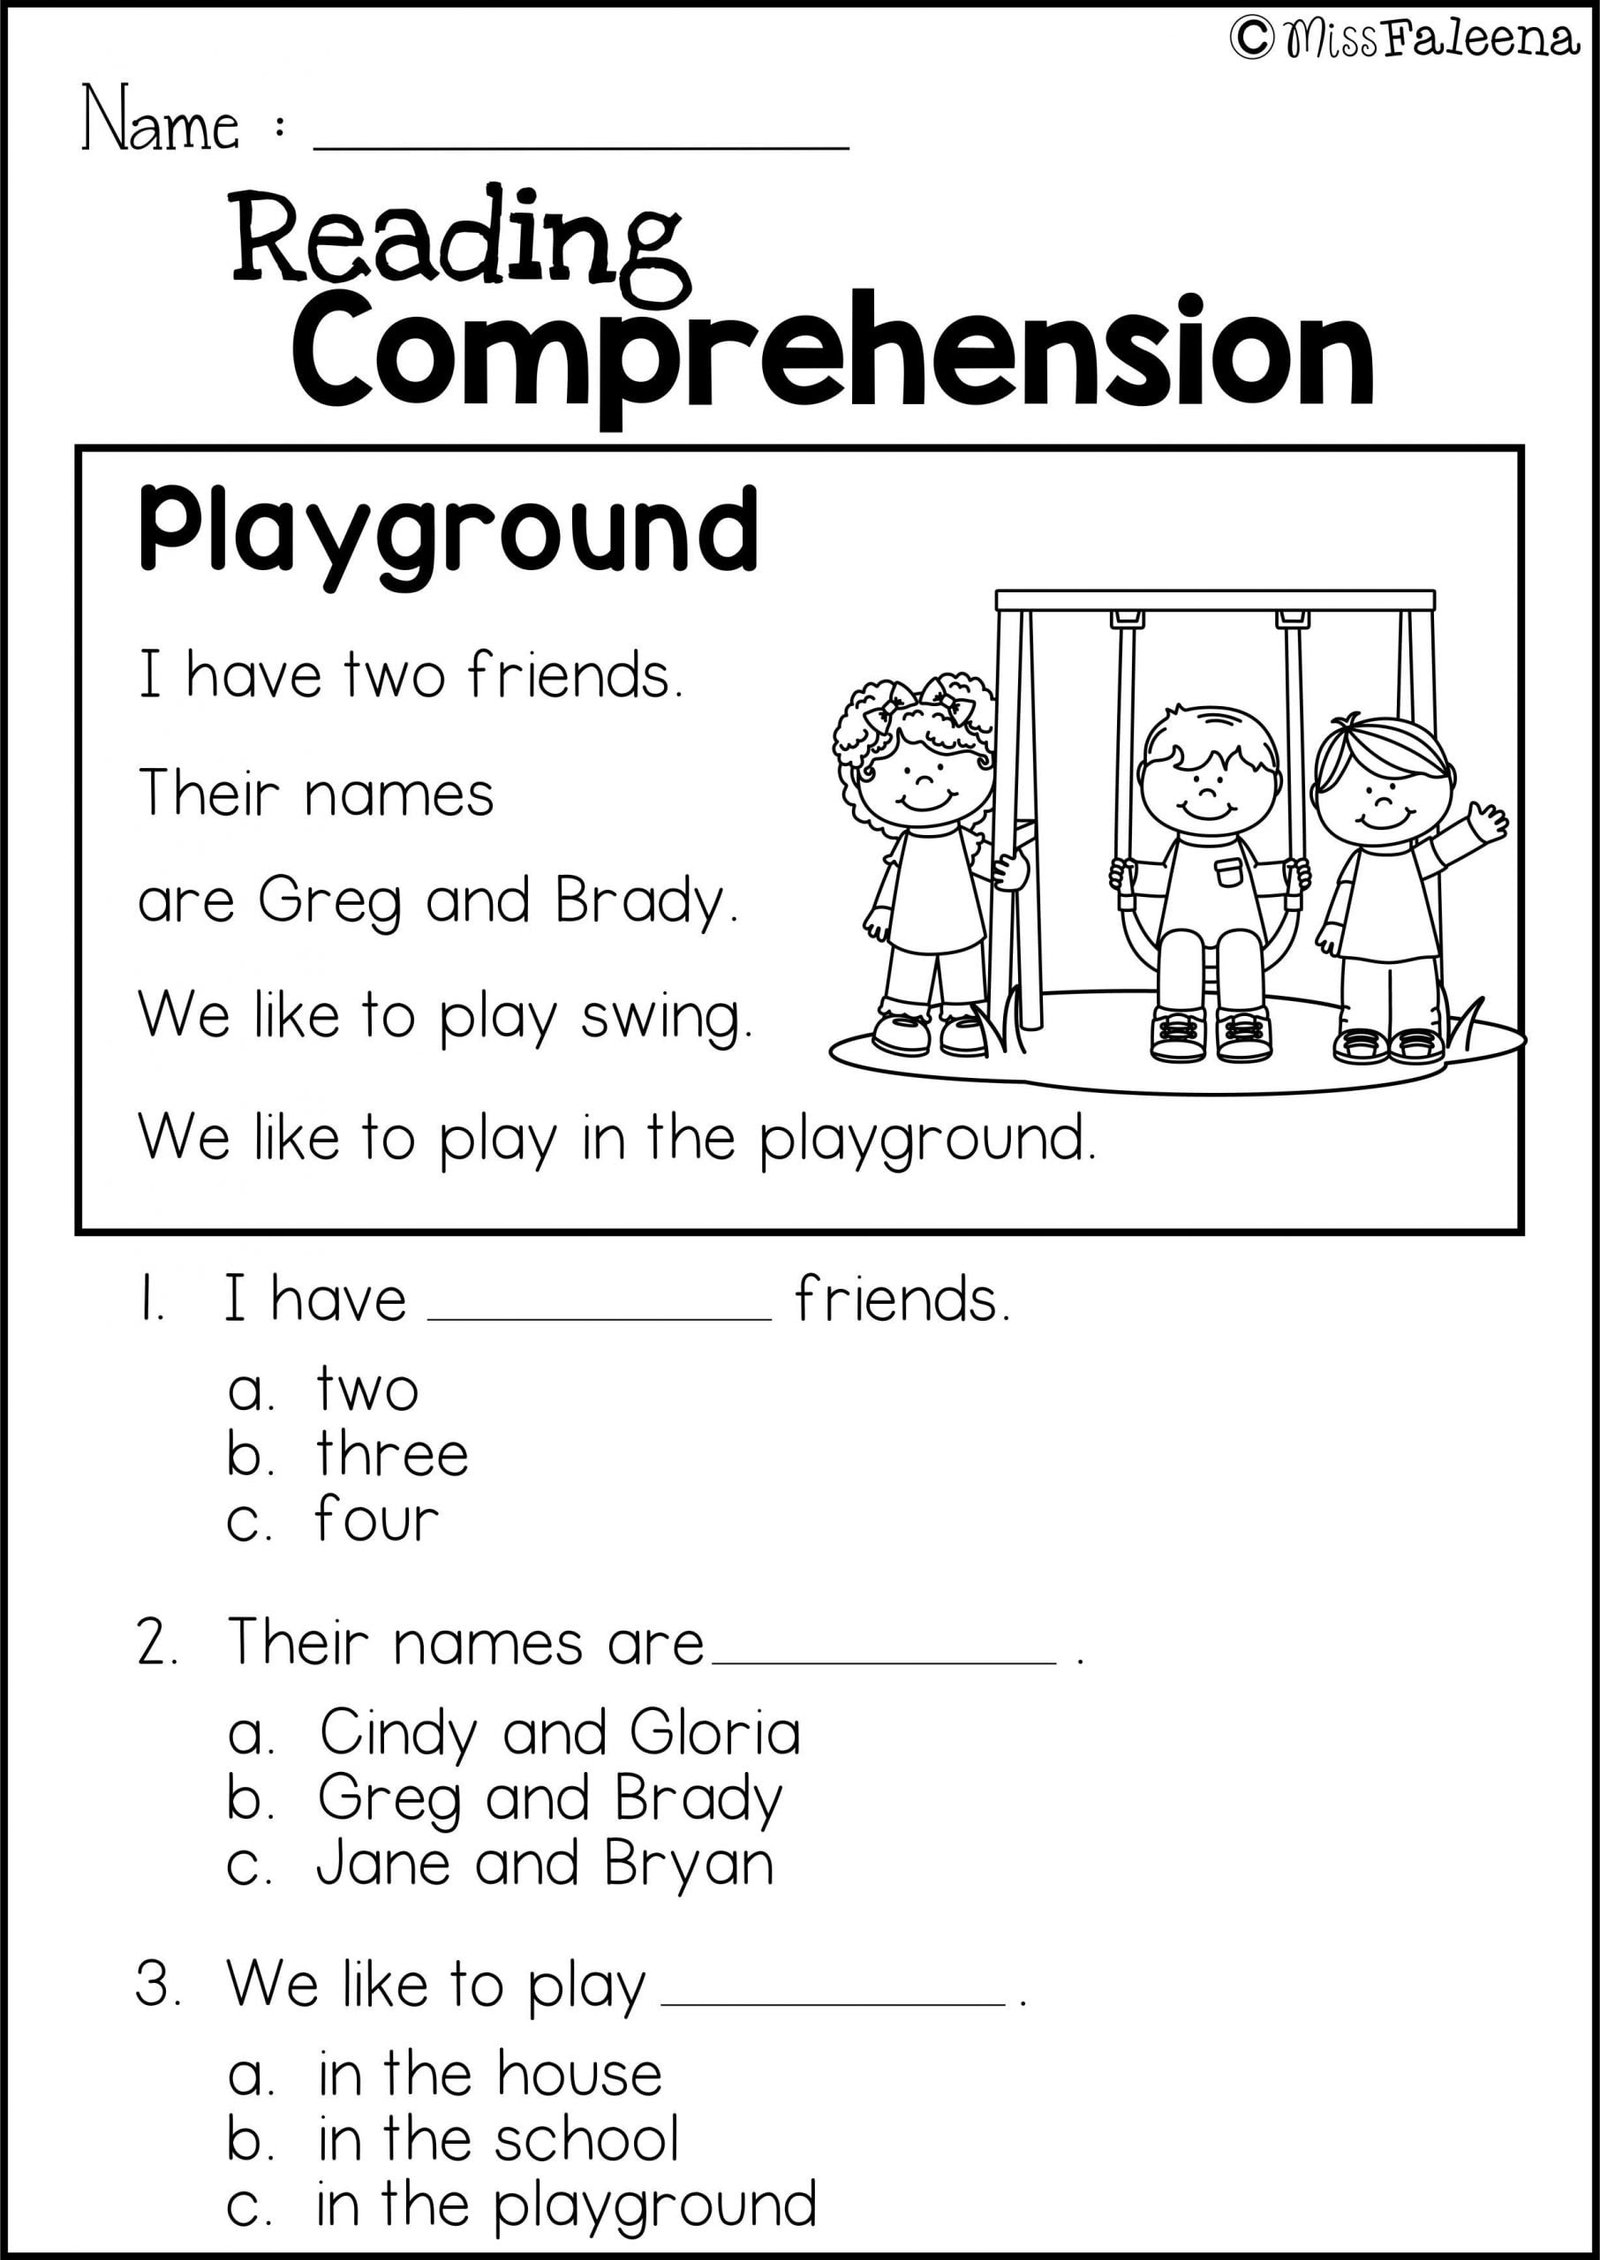 the-playground-reading-comprehension-worksheets-worksheetscity